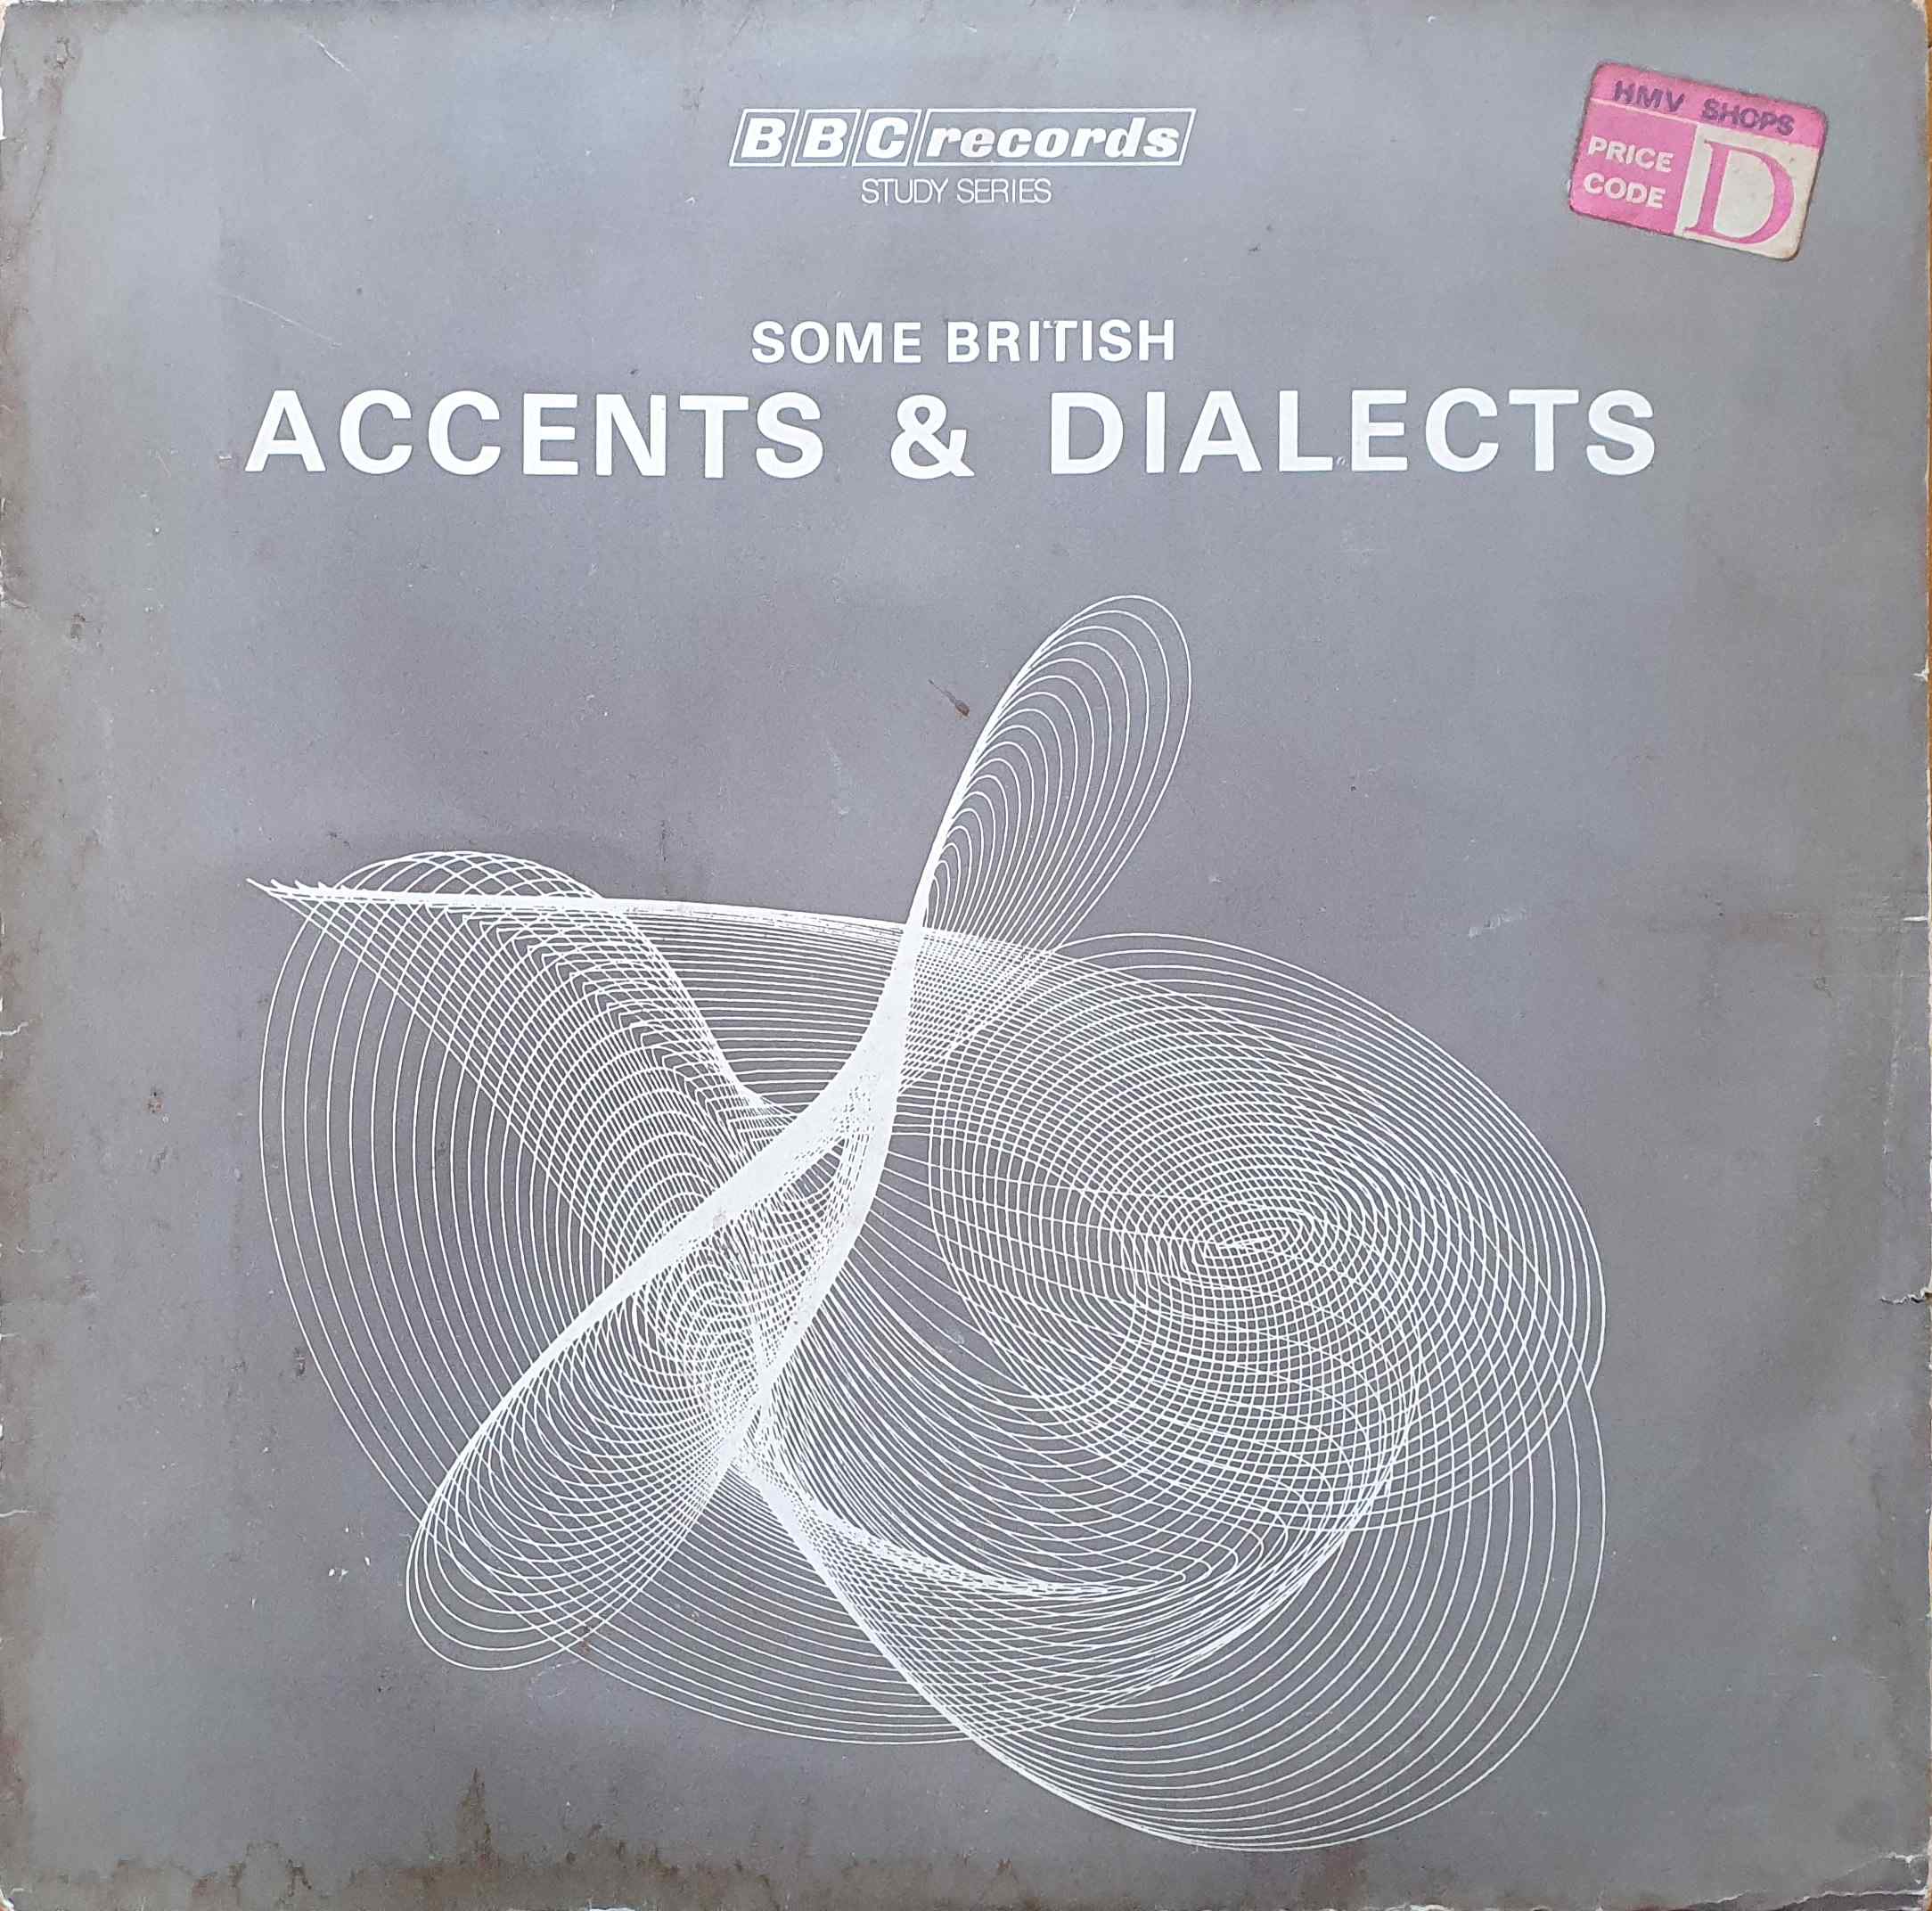 Picture of RESR 28 Some British accents and dialects by artist Various from the BBC albums - Records and Tapes library